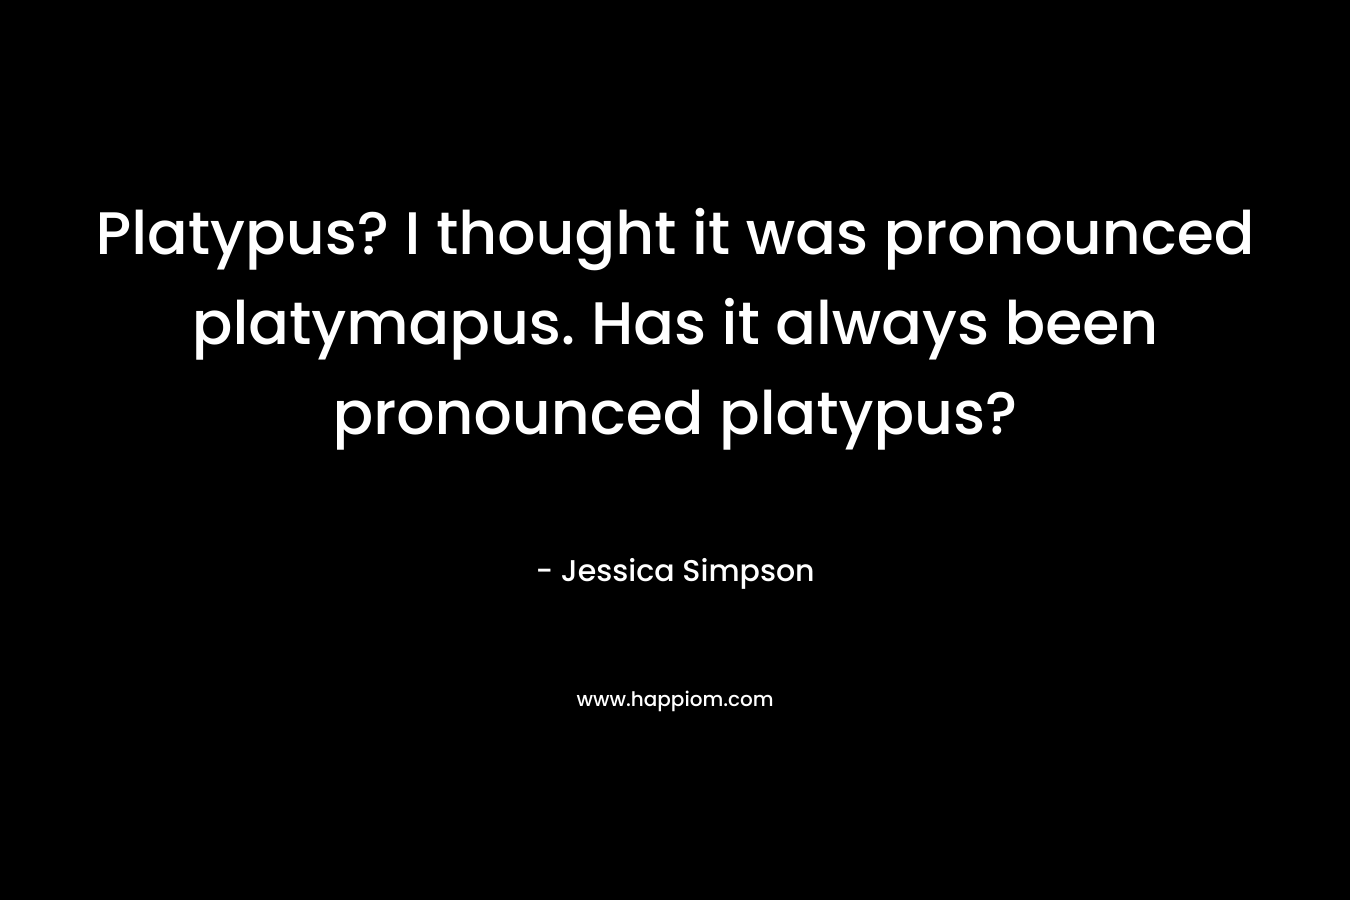 Platypus? I thought it was pronounced platymapus. Has it always been pronounced platypus?